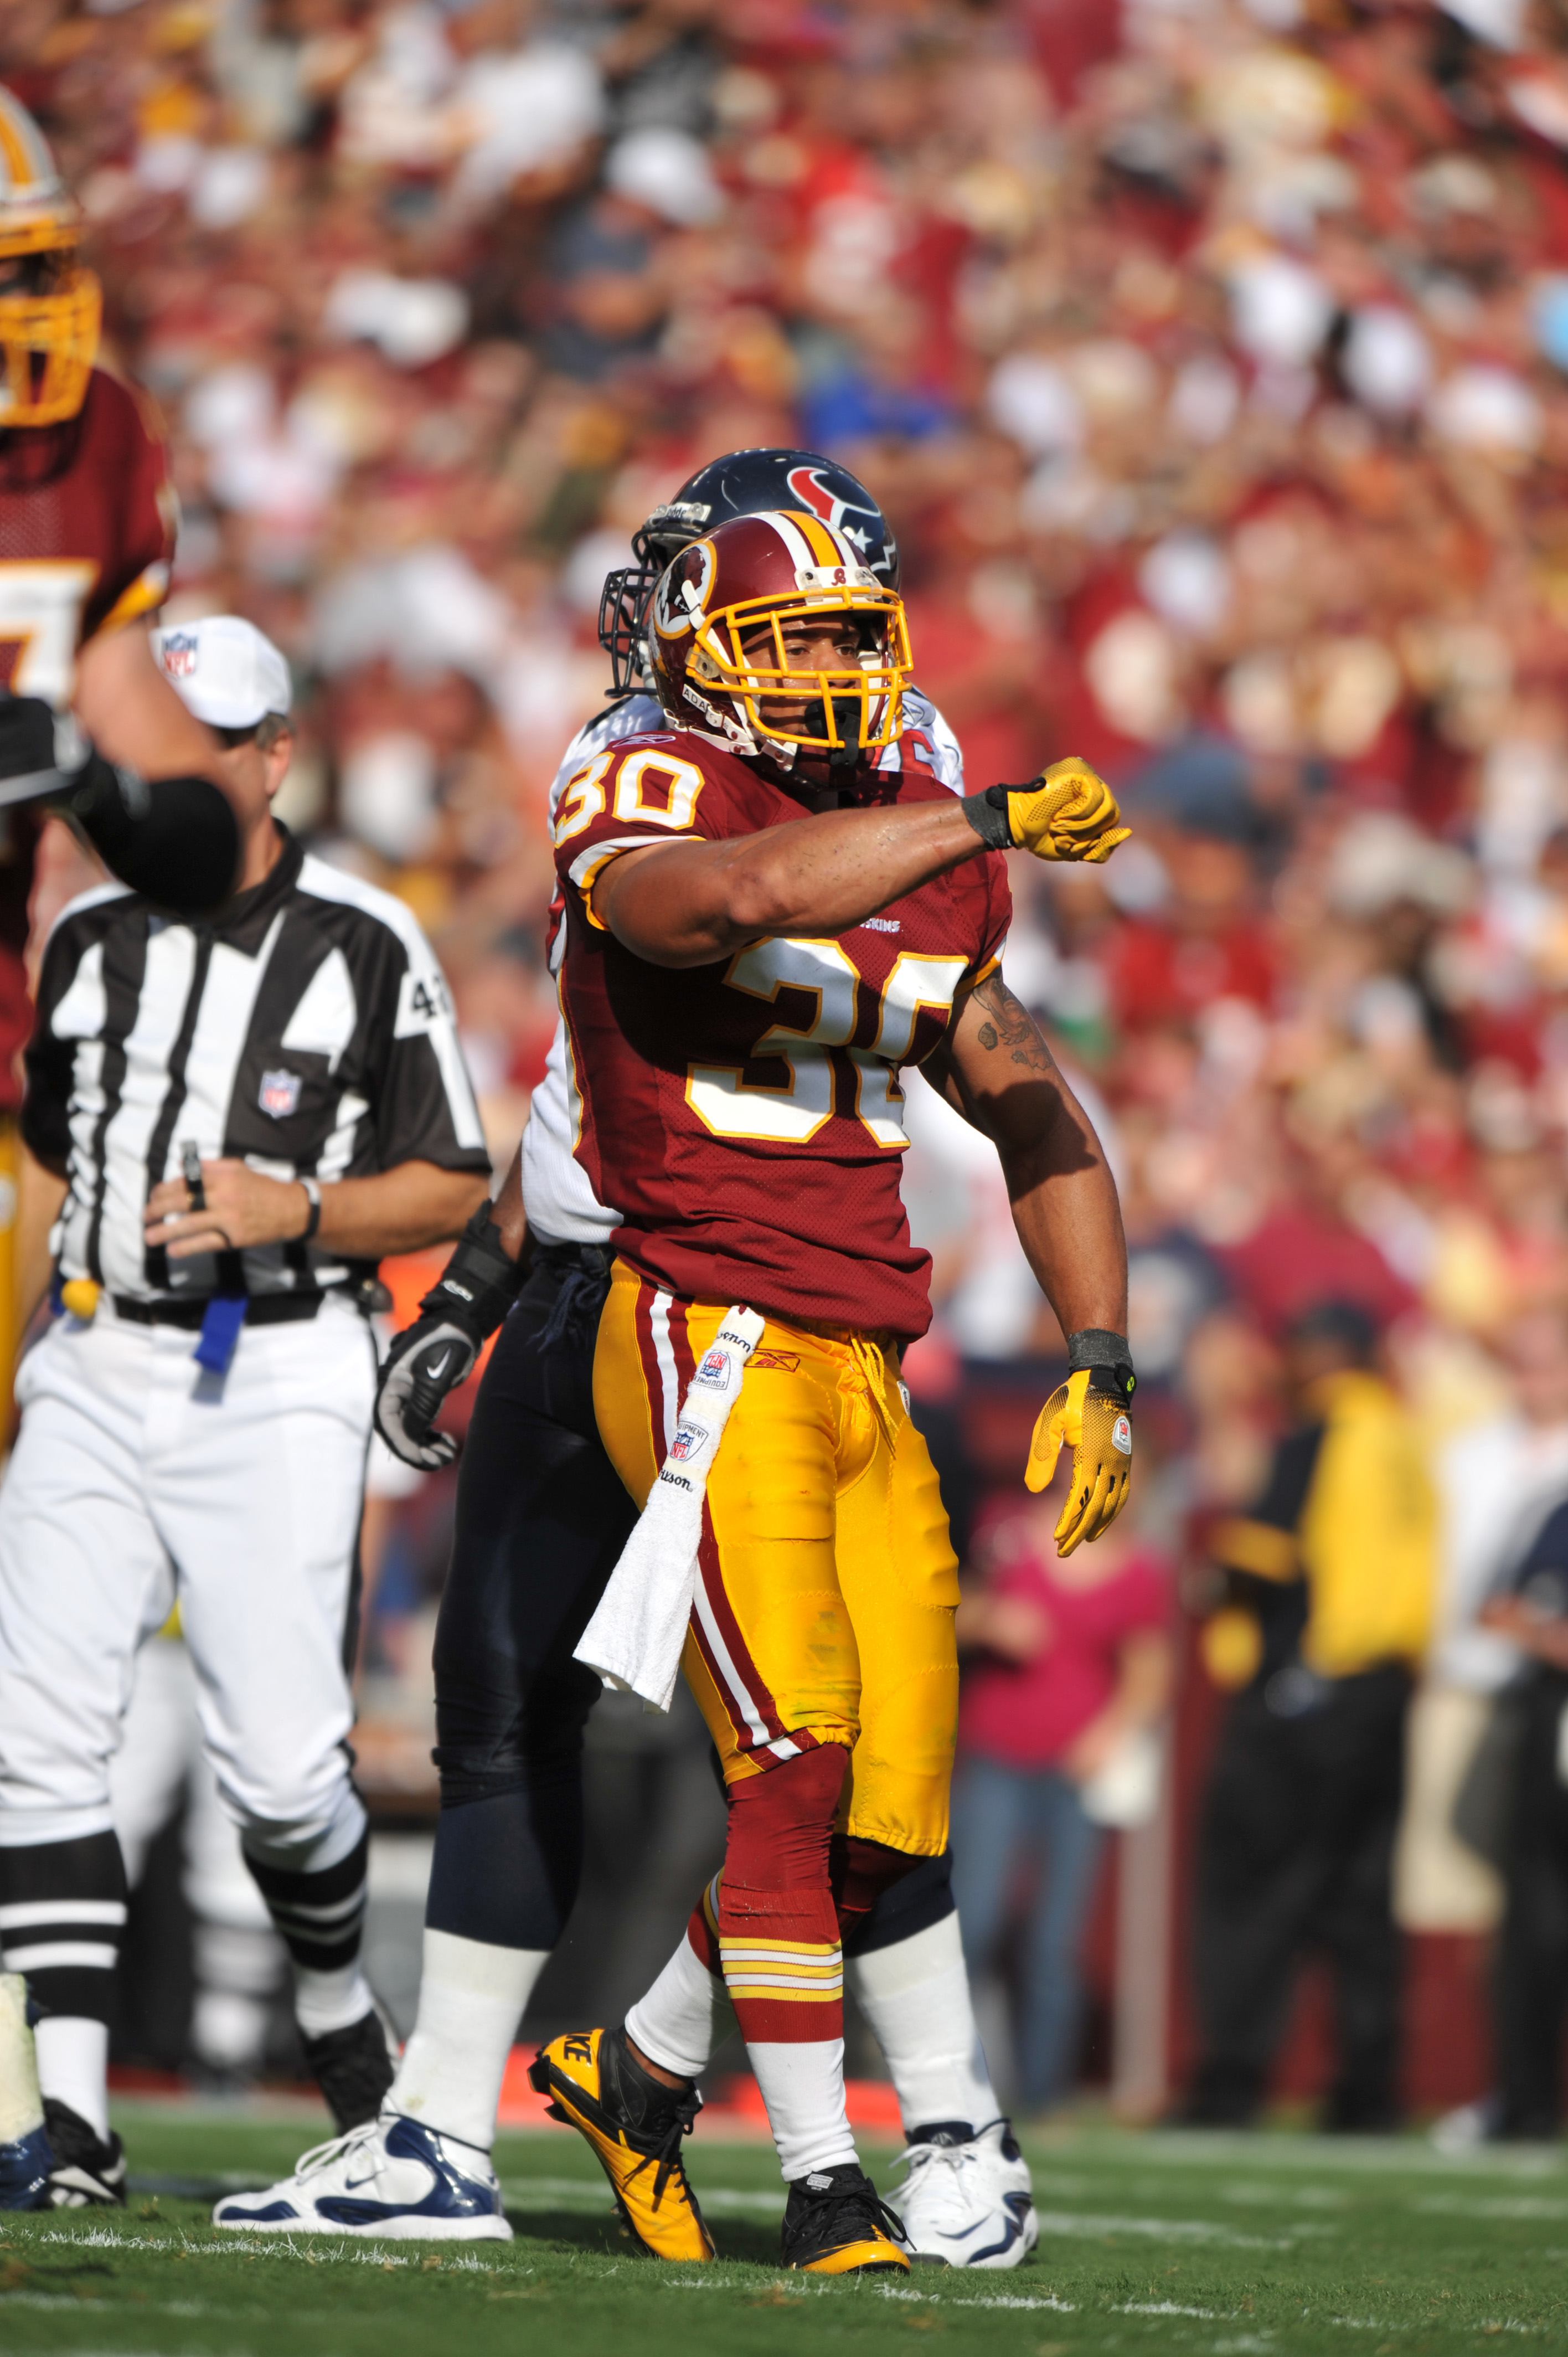 LANDOVER, MD - SEPTEMBER 19:  LaRon Landry #30 of the Washington Redskins celebrates a play against the Houston Texans at FedExField on September 19, 2010 in Landover, Maryland. The Texans defeated the Redskins in overtime 30-27. (Photo by Larry French/Ge